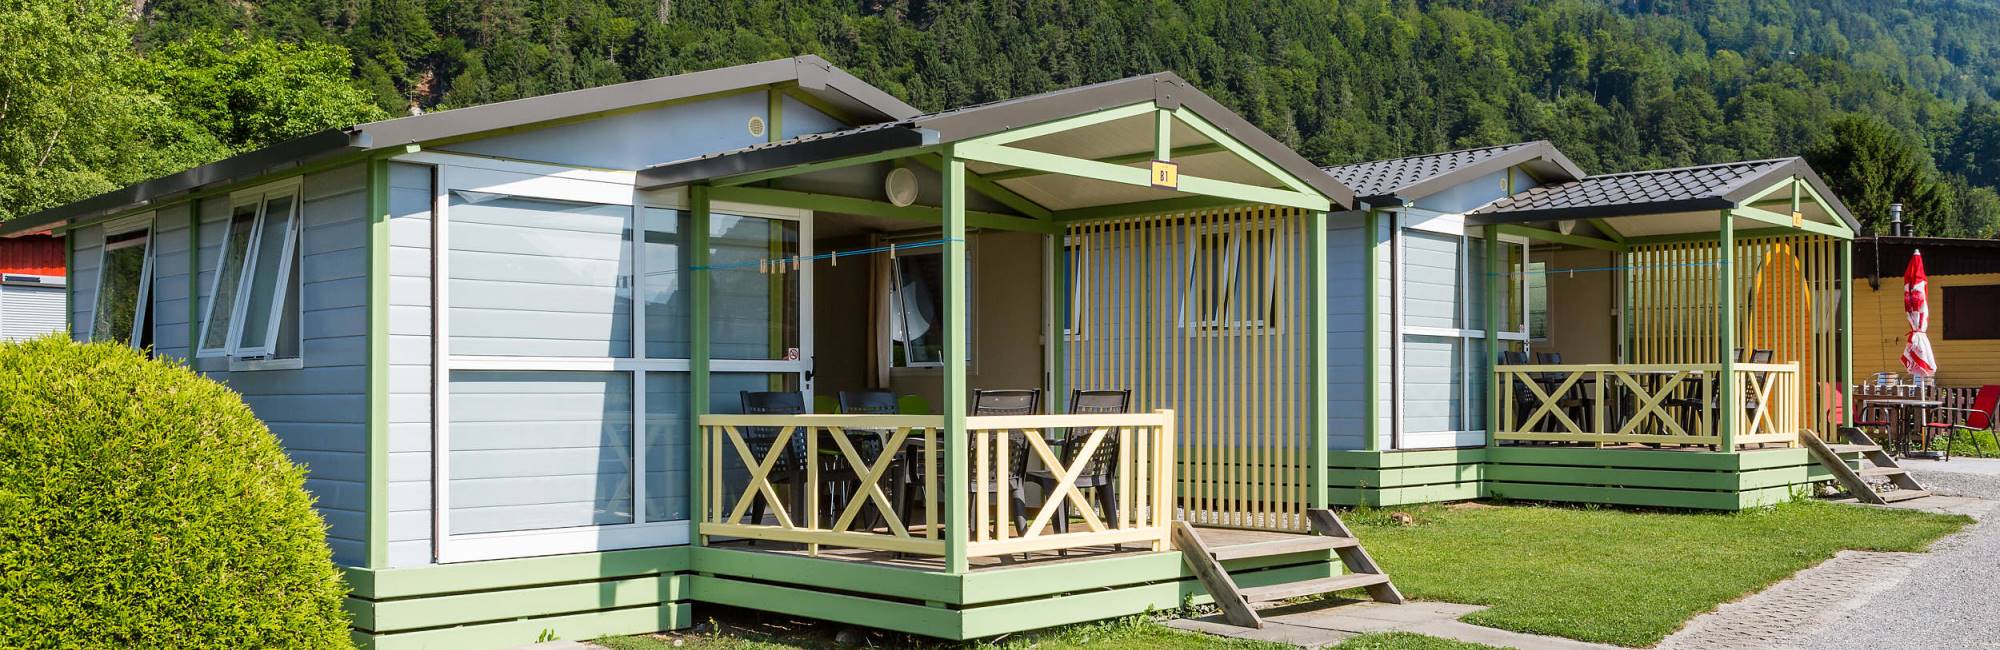 Add comfort to your vacation and book a bungalow on the Camping Lazy Rancho in Unterseen near Interlaken!